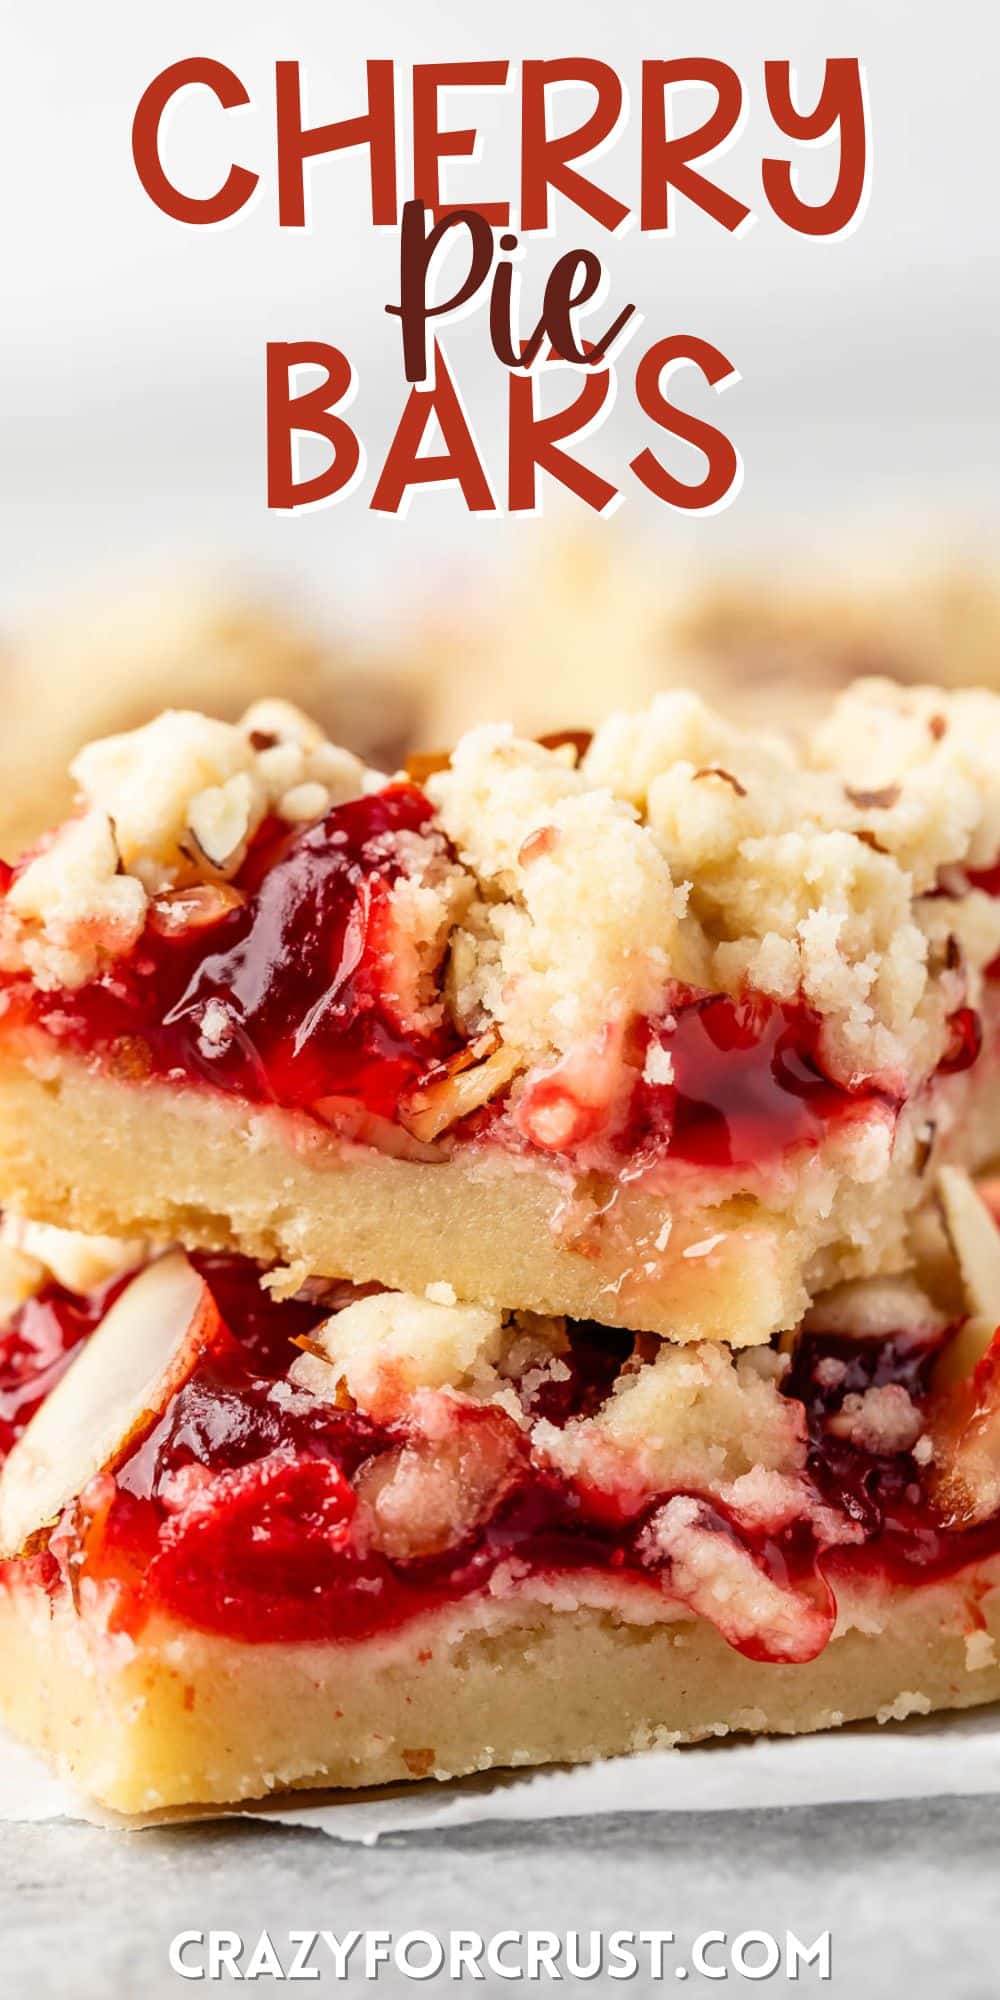 pie crust bars with red cherry pie filling and sliced almonds on top with words on the image.